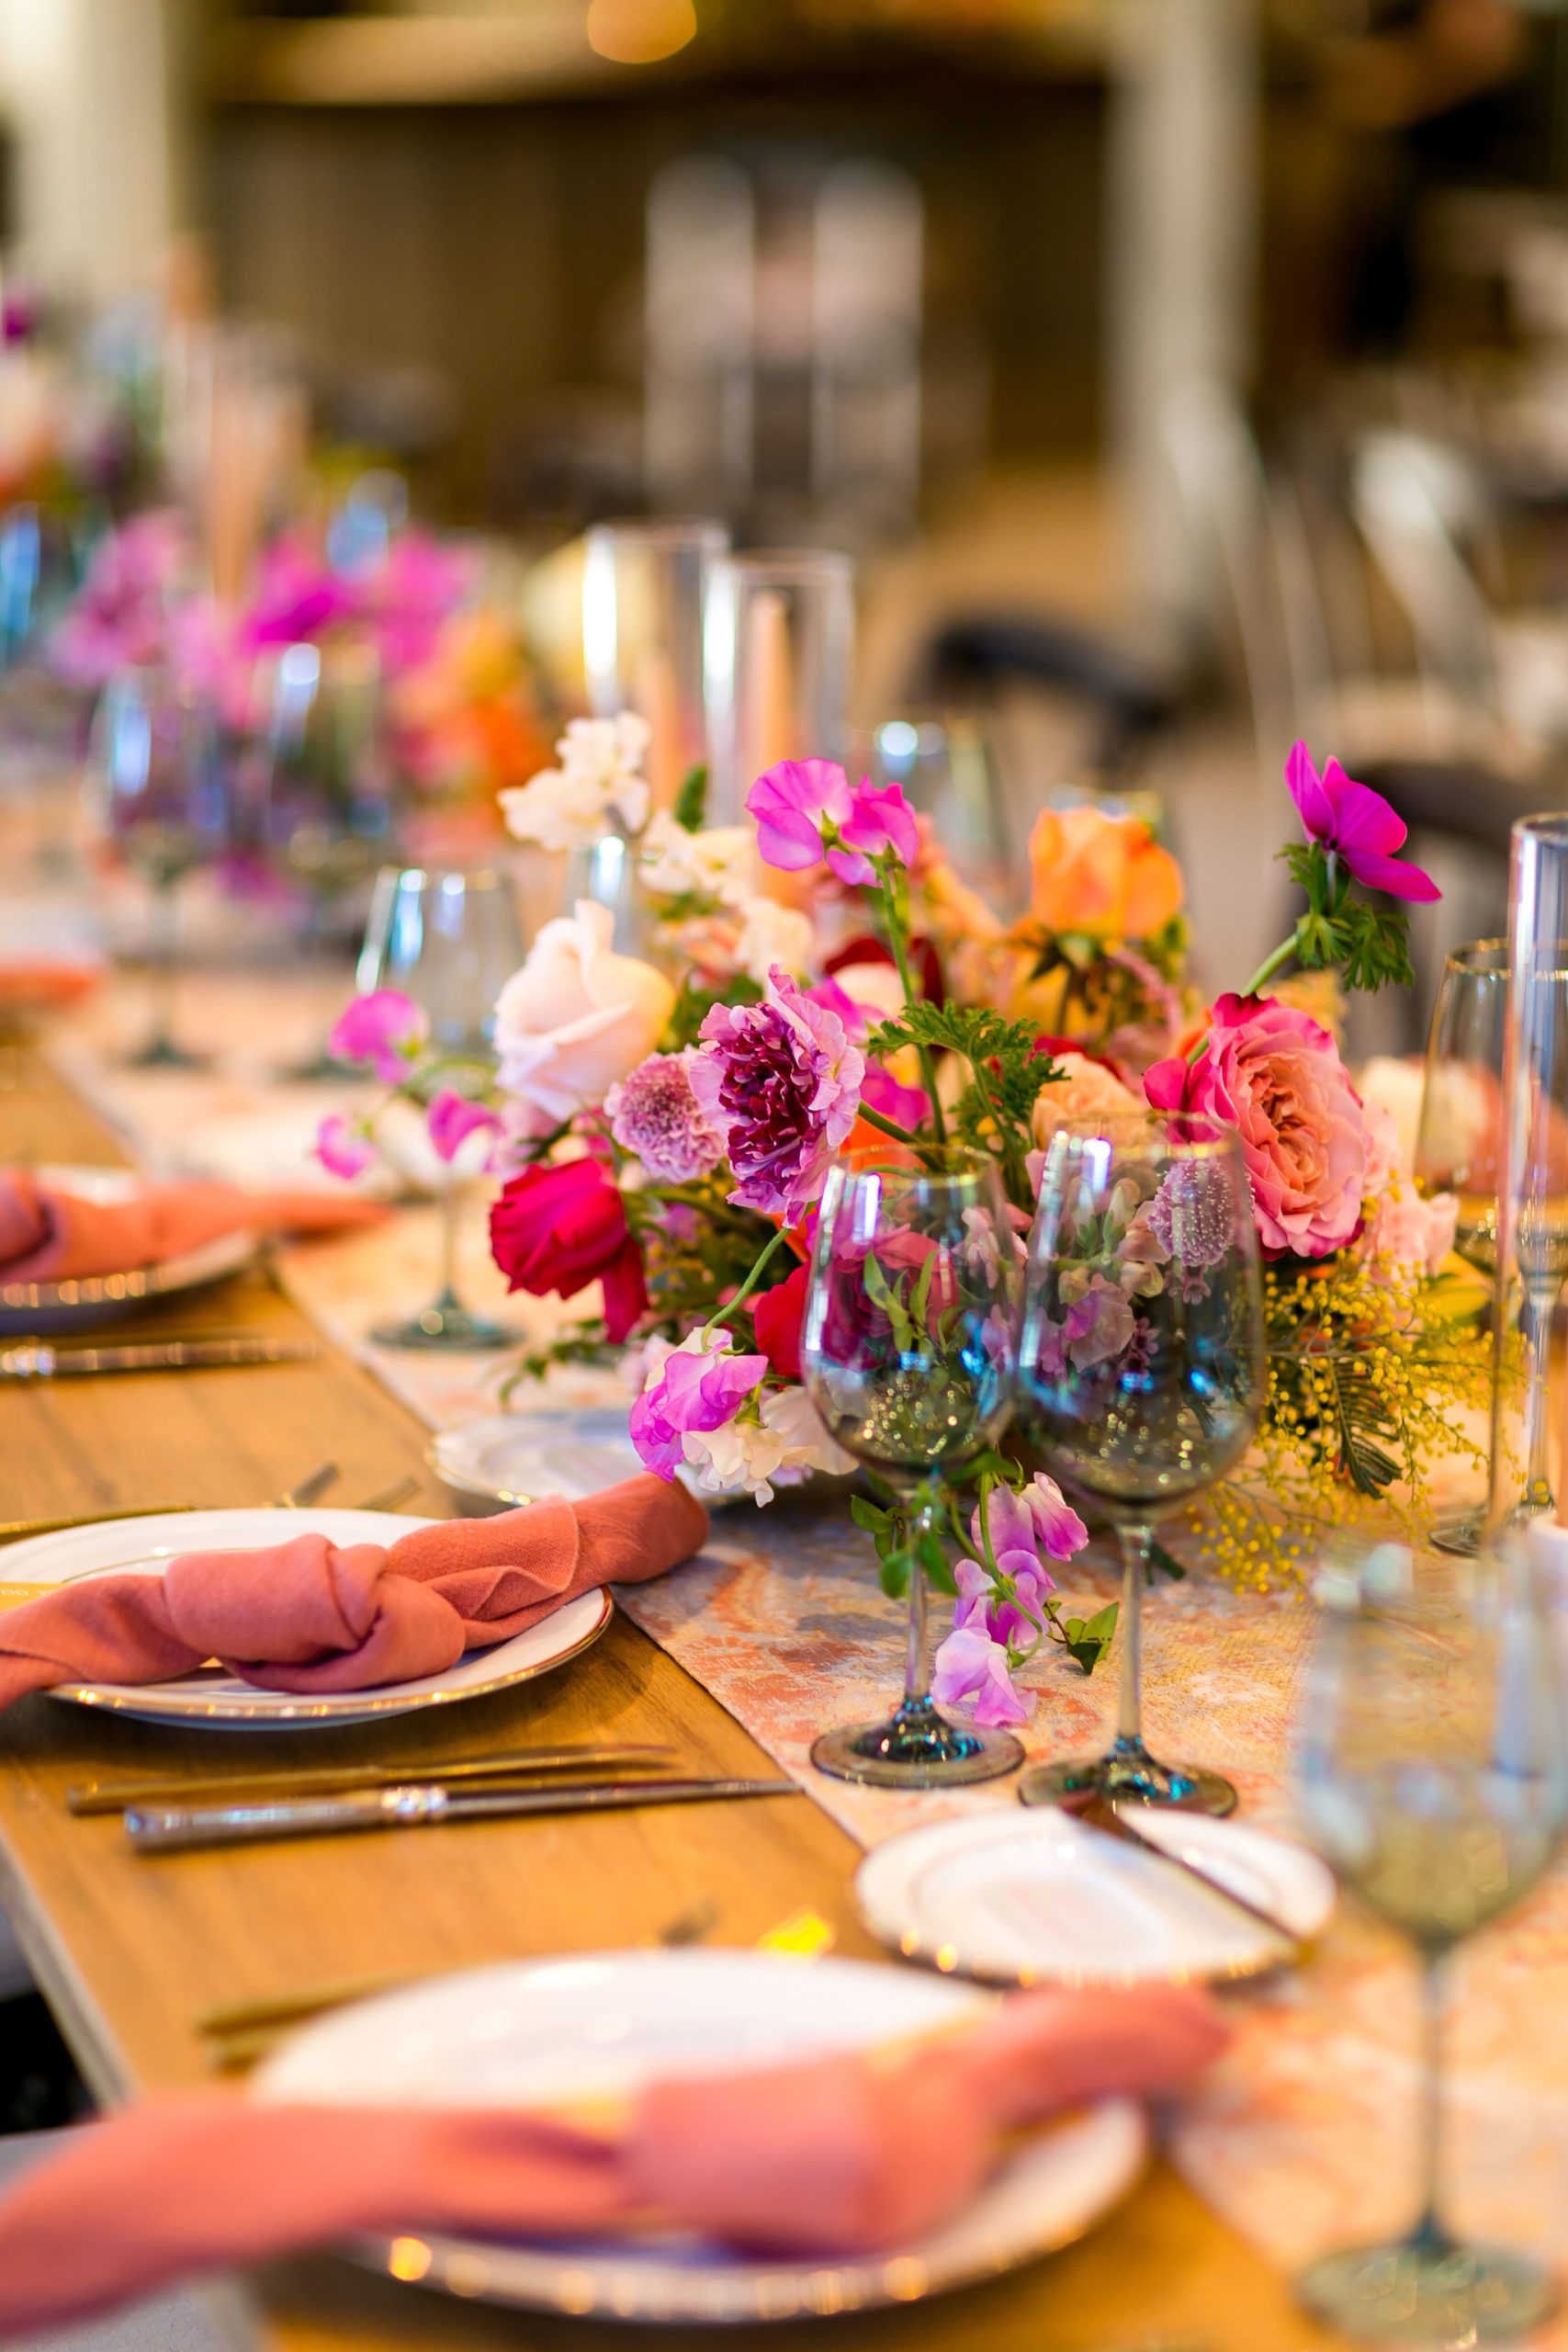 bright and energetic wedding reception tables with orange napkins and red, purple, orange and pink floral centerpieces on wooden farm tables